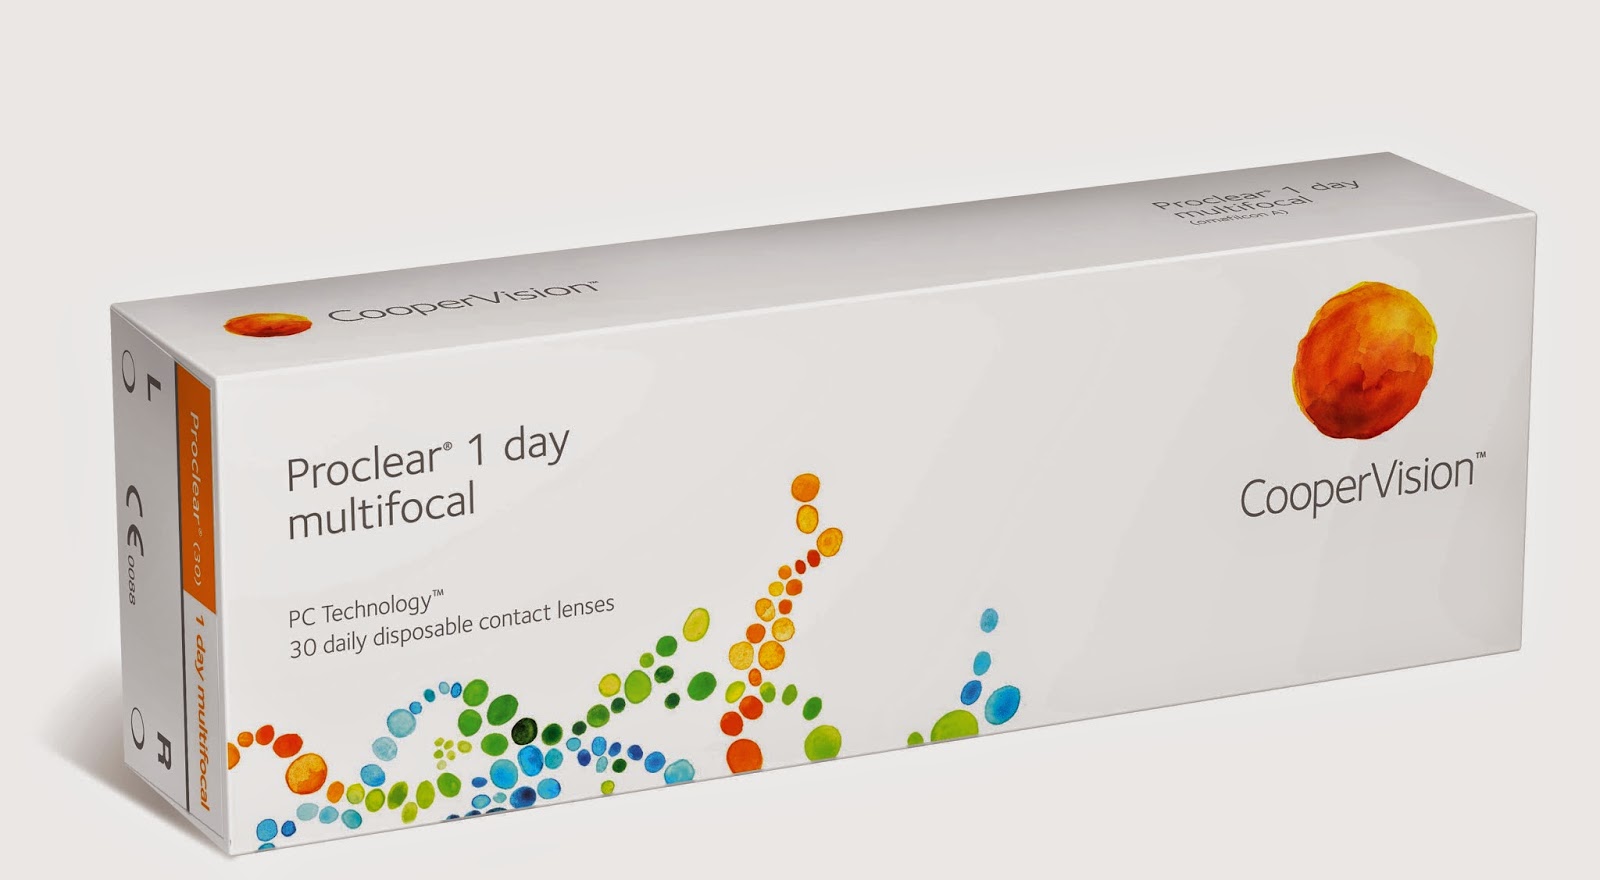 coopervision-proclear-1-day-multifocal-contacts-lens-singapore-arts